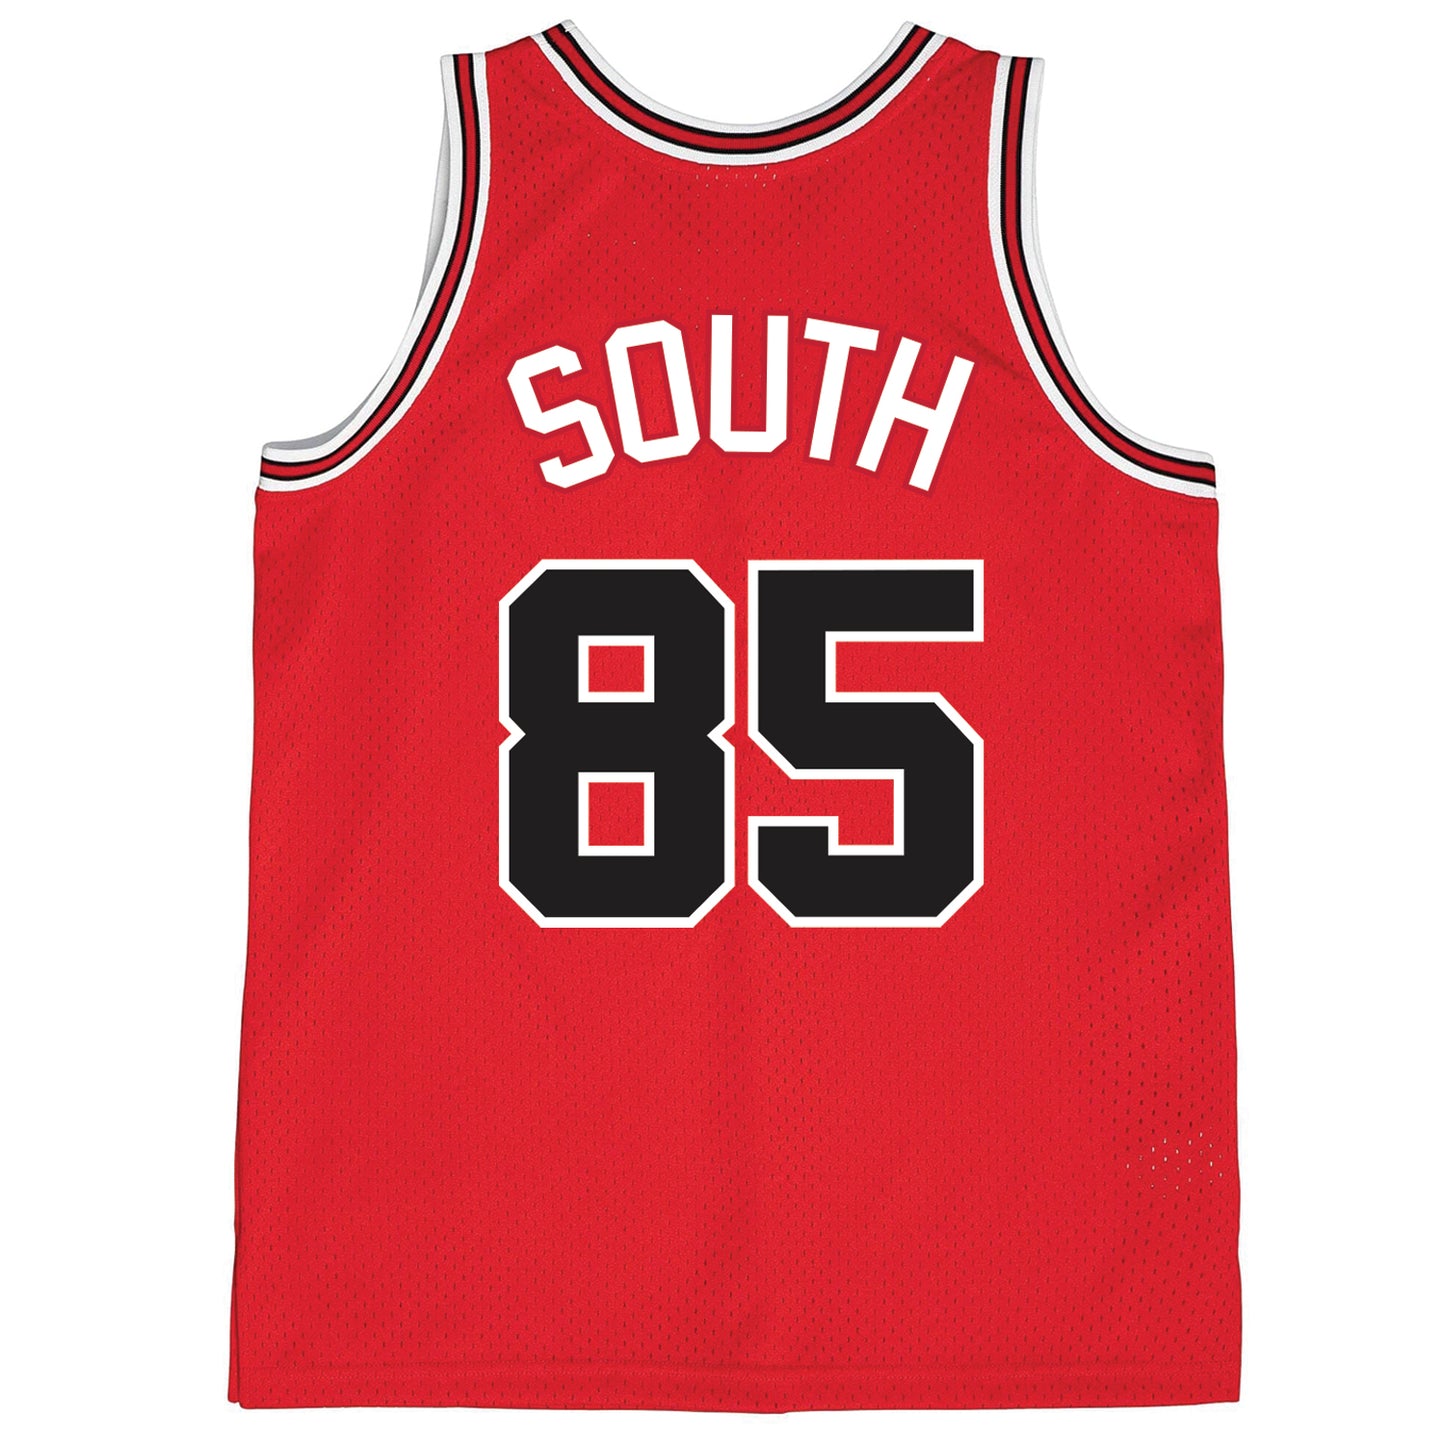 City Edition South Script Jersey-Red